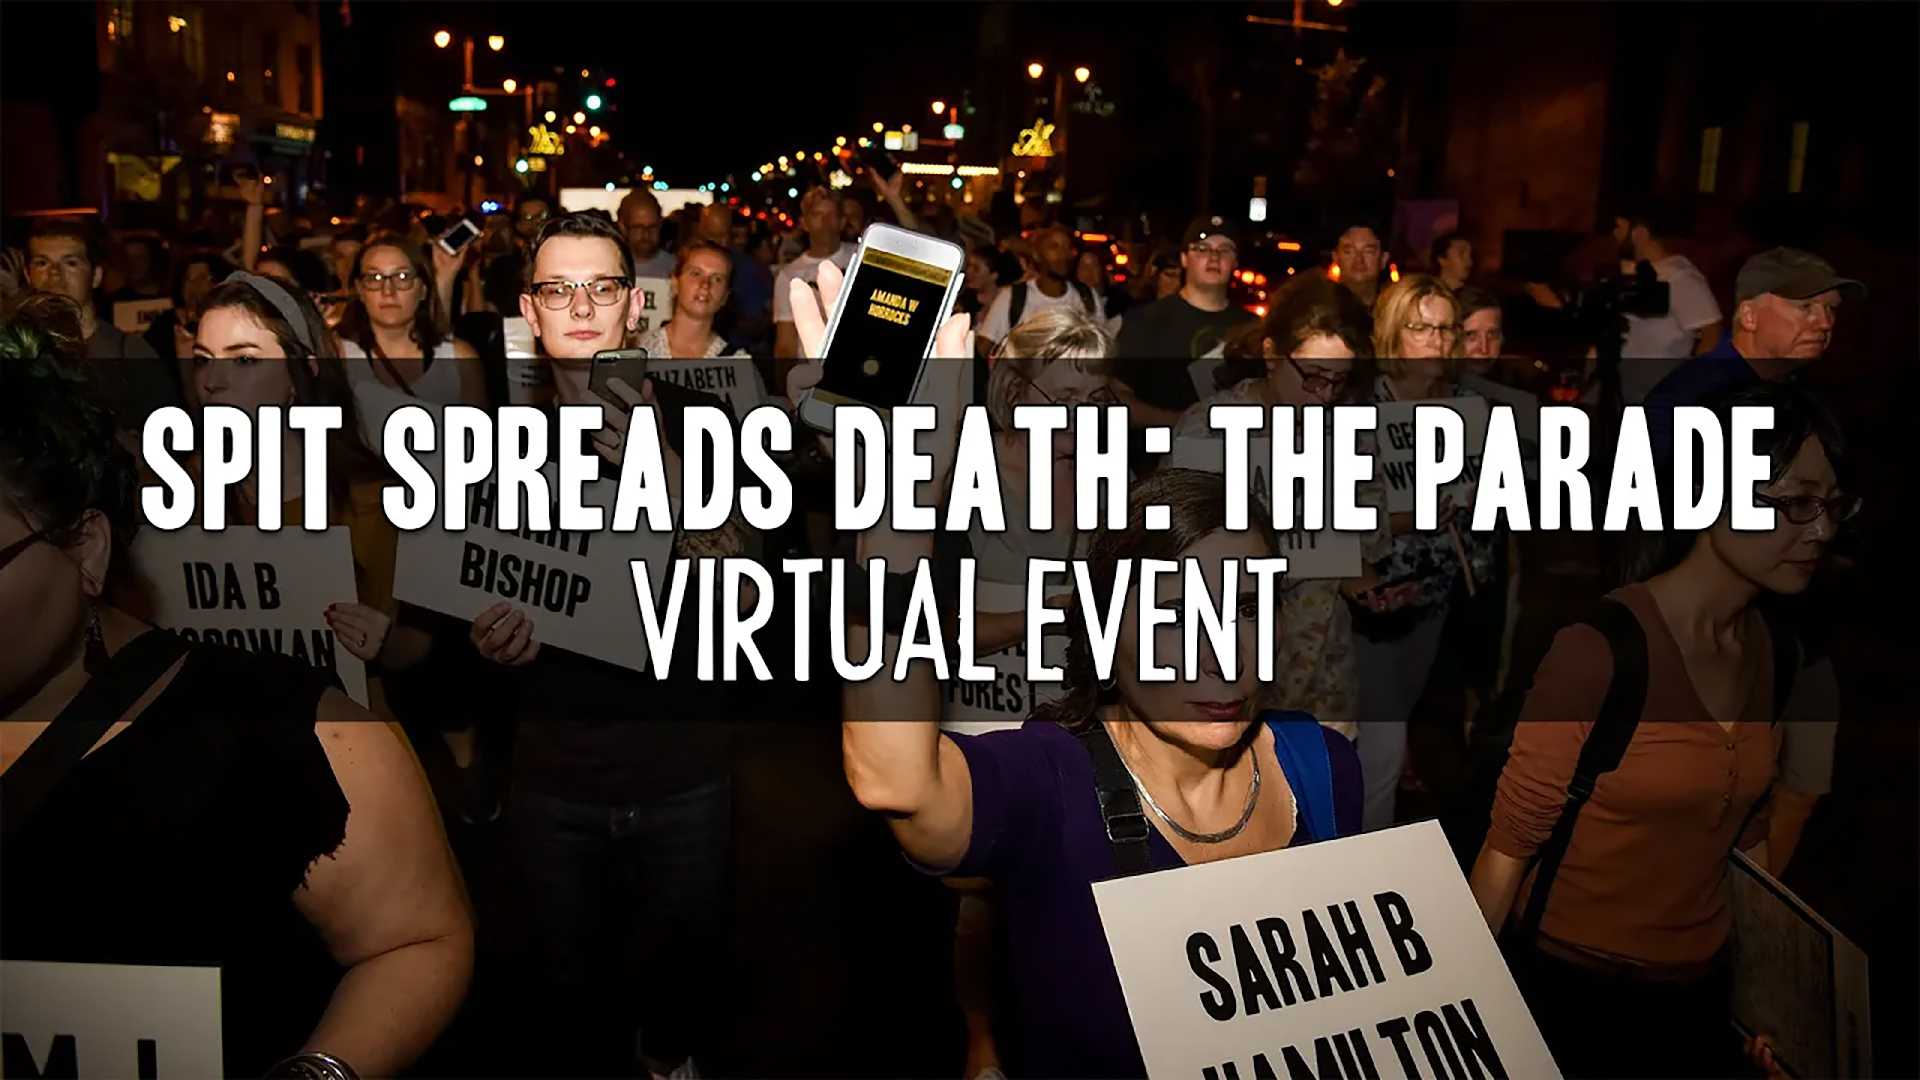 Photograph of a crowd marching with signs with text overlaid reading "Spit Spreads Death: The Parade Virtual Event"